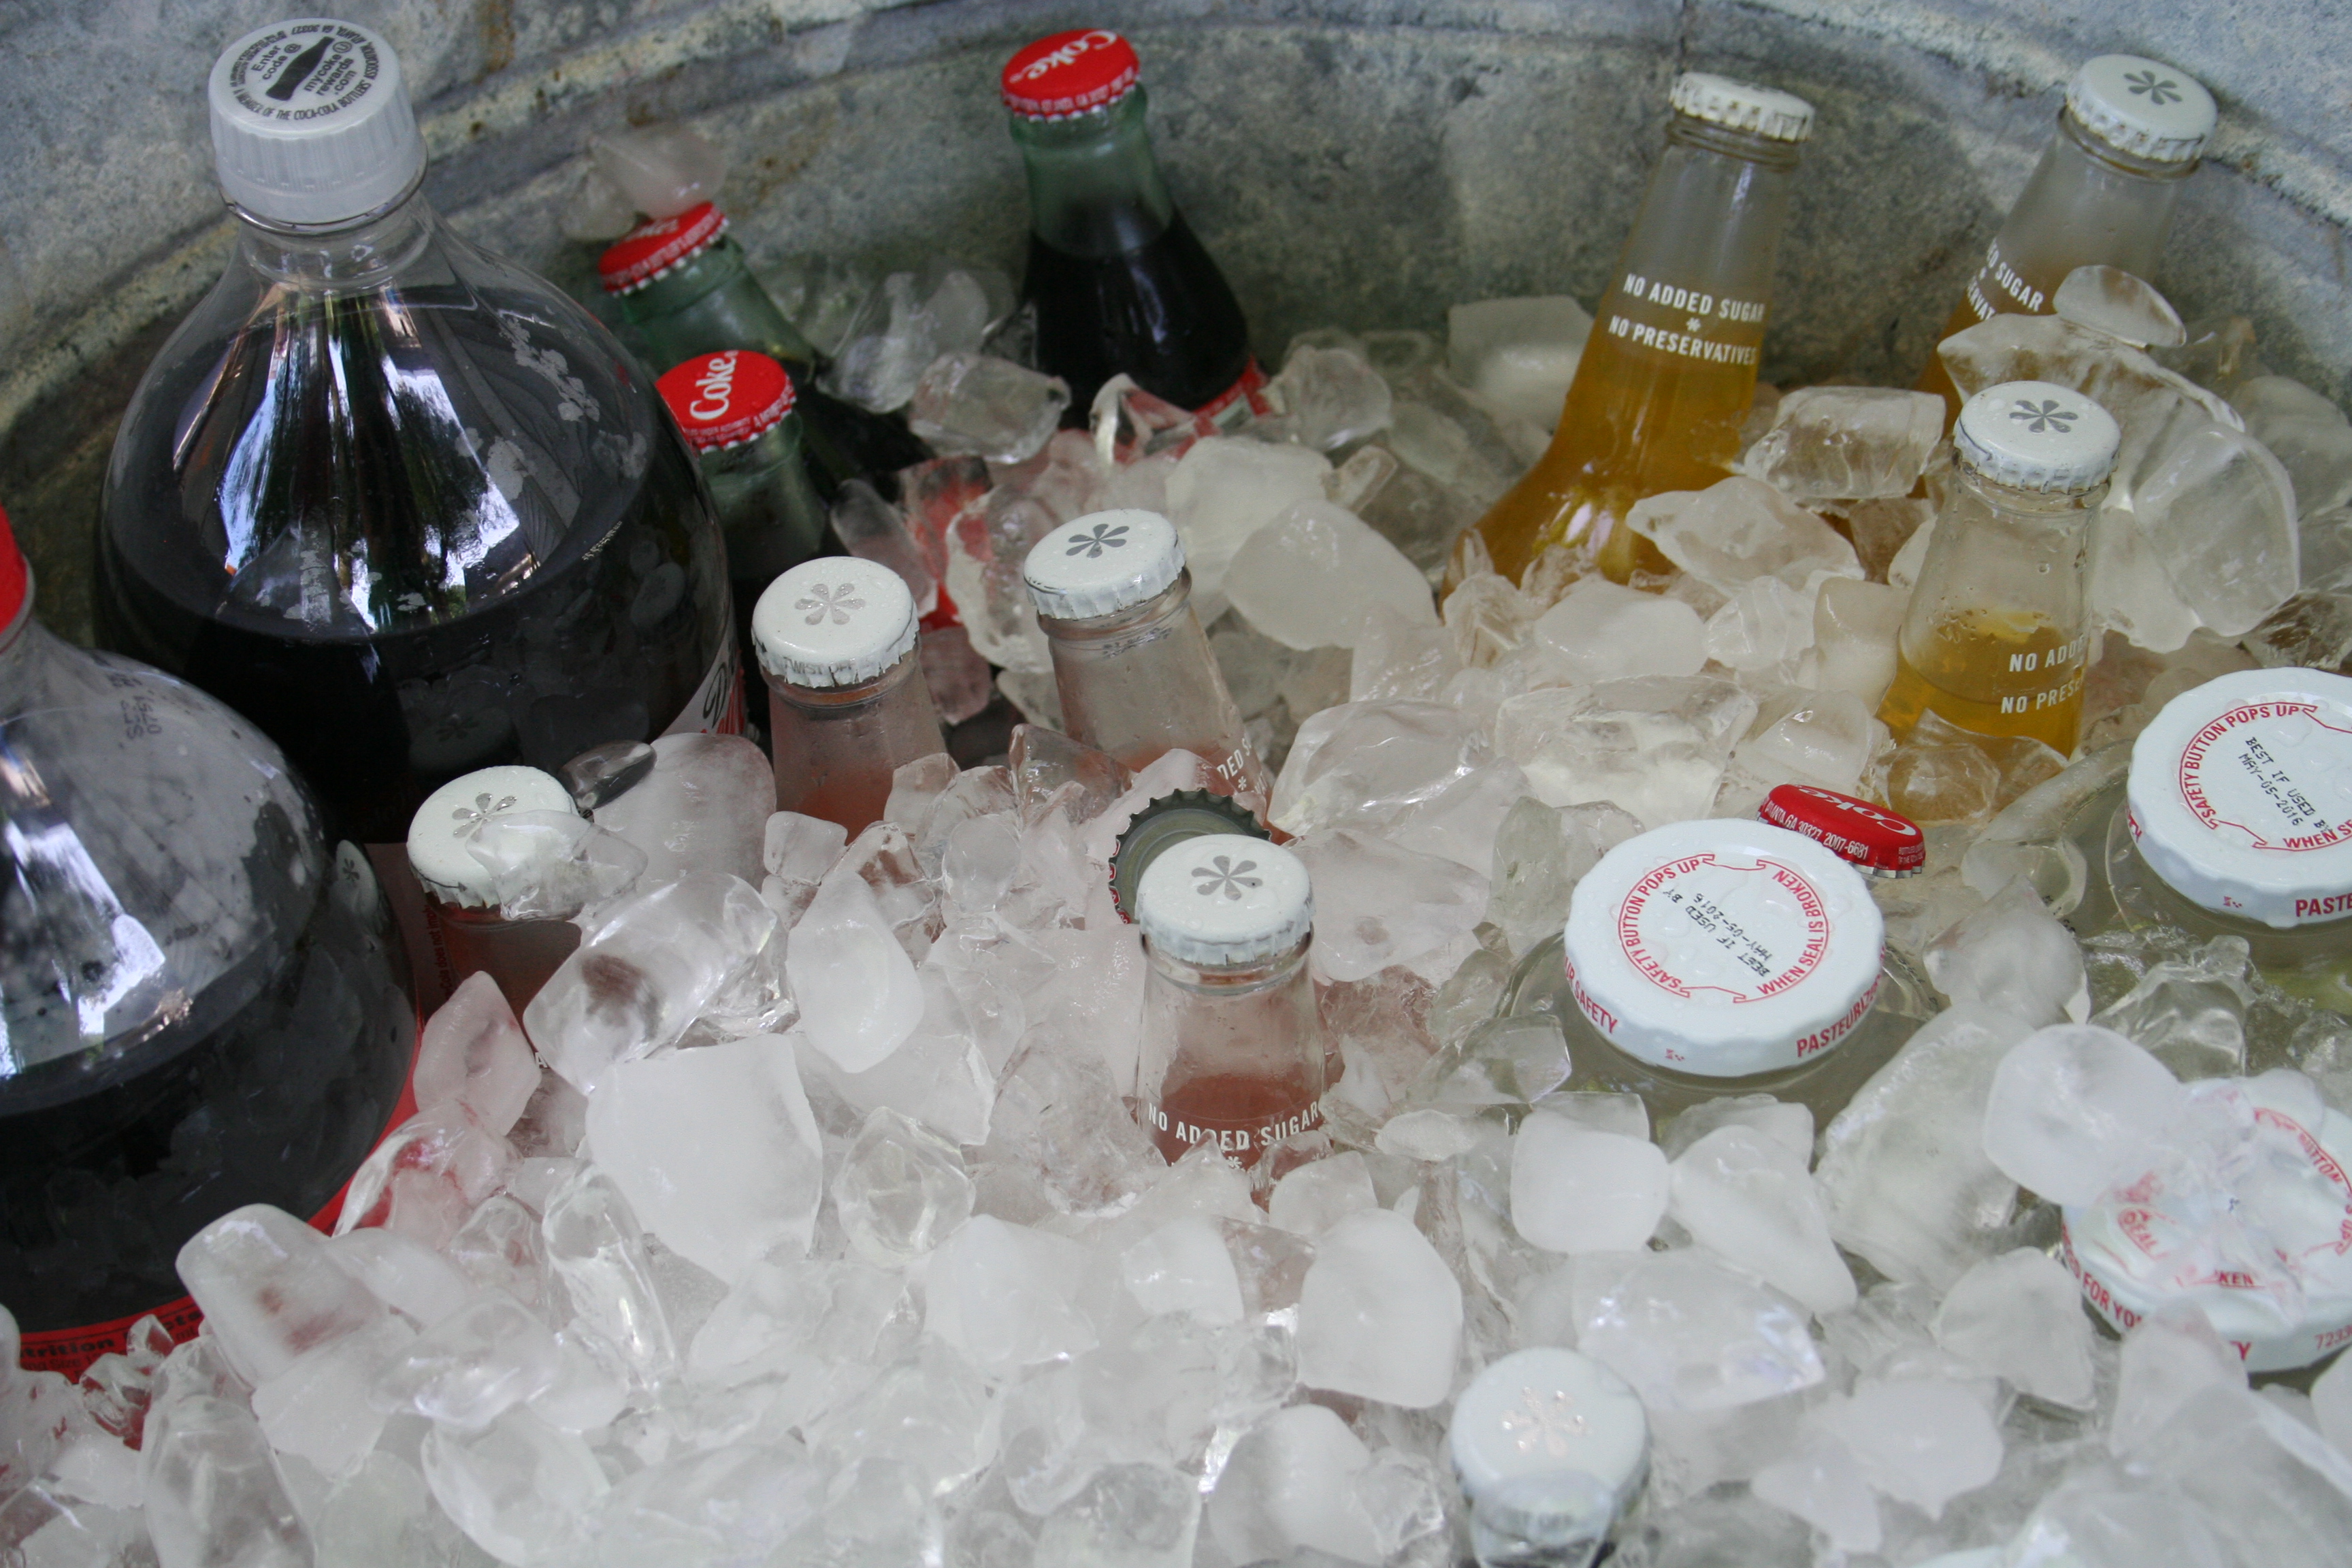 Bottled drinks in an old wash tub | thelovelylauralife.com